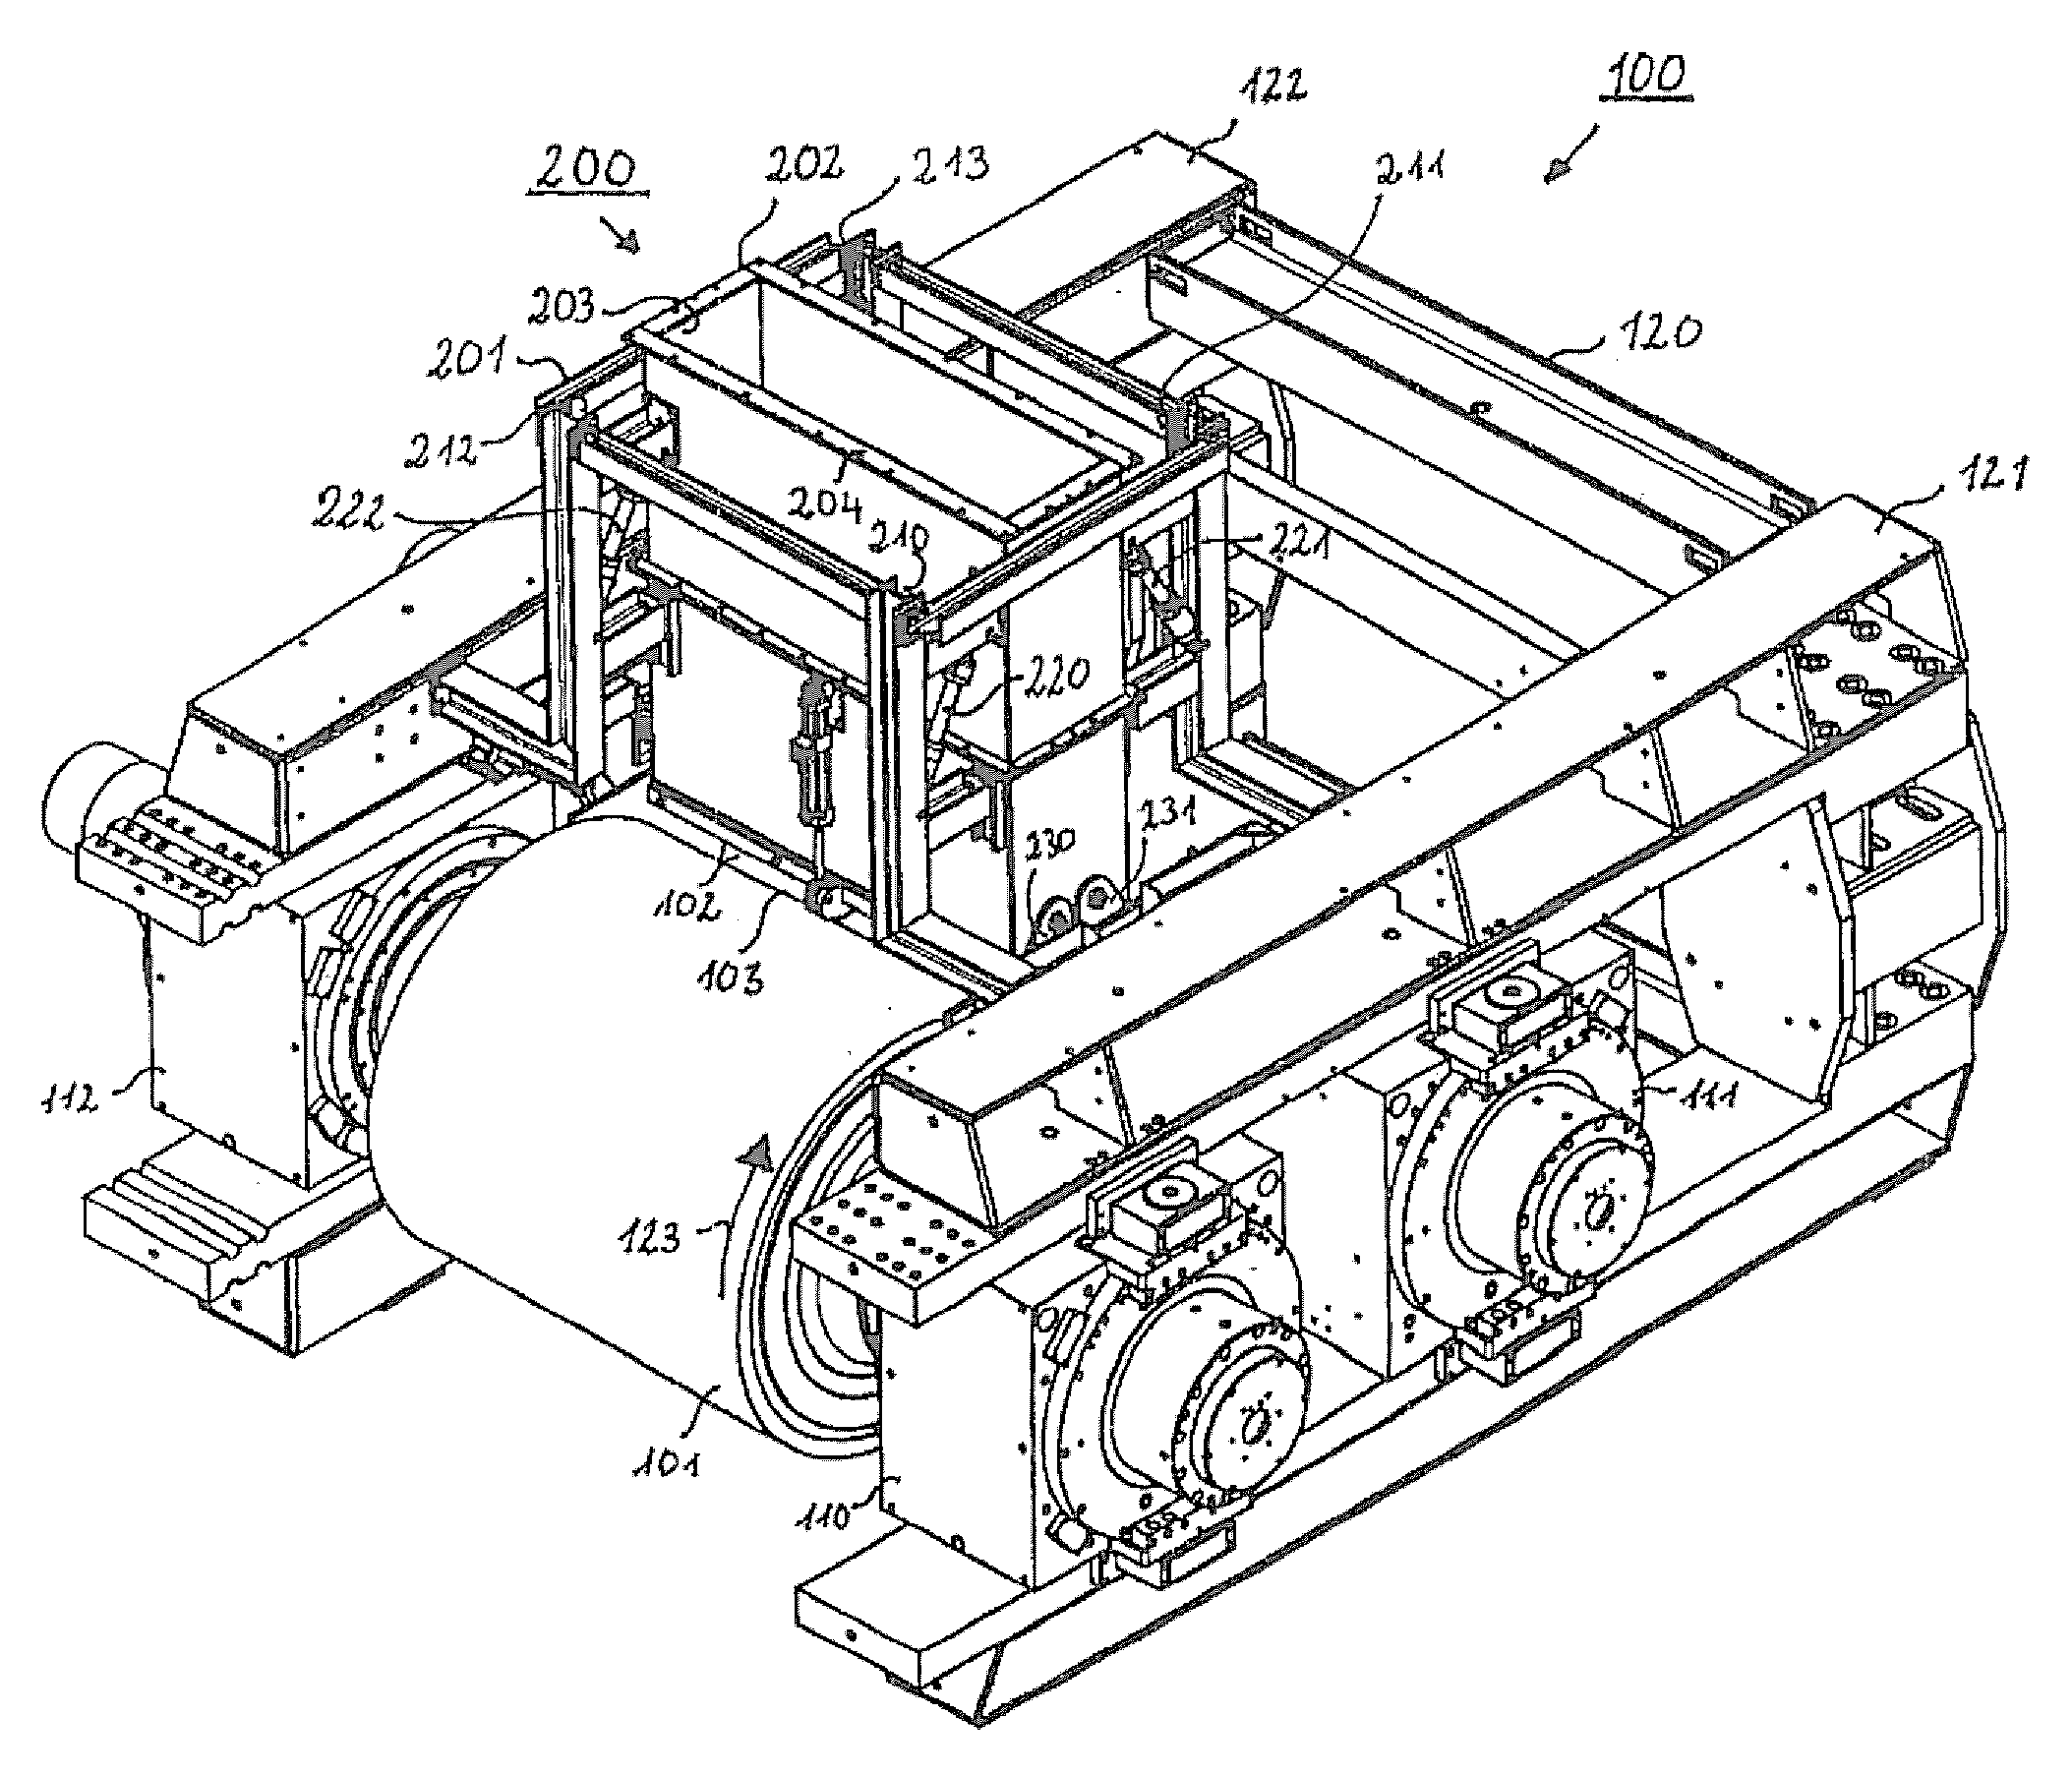 Feed device with two rotary valves which are variable independently of each other